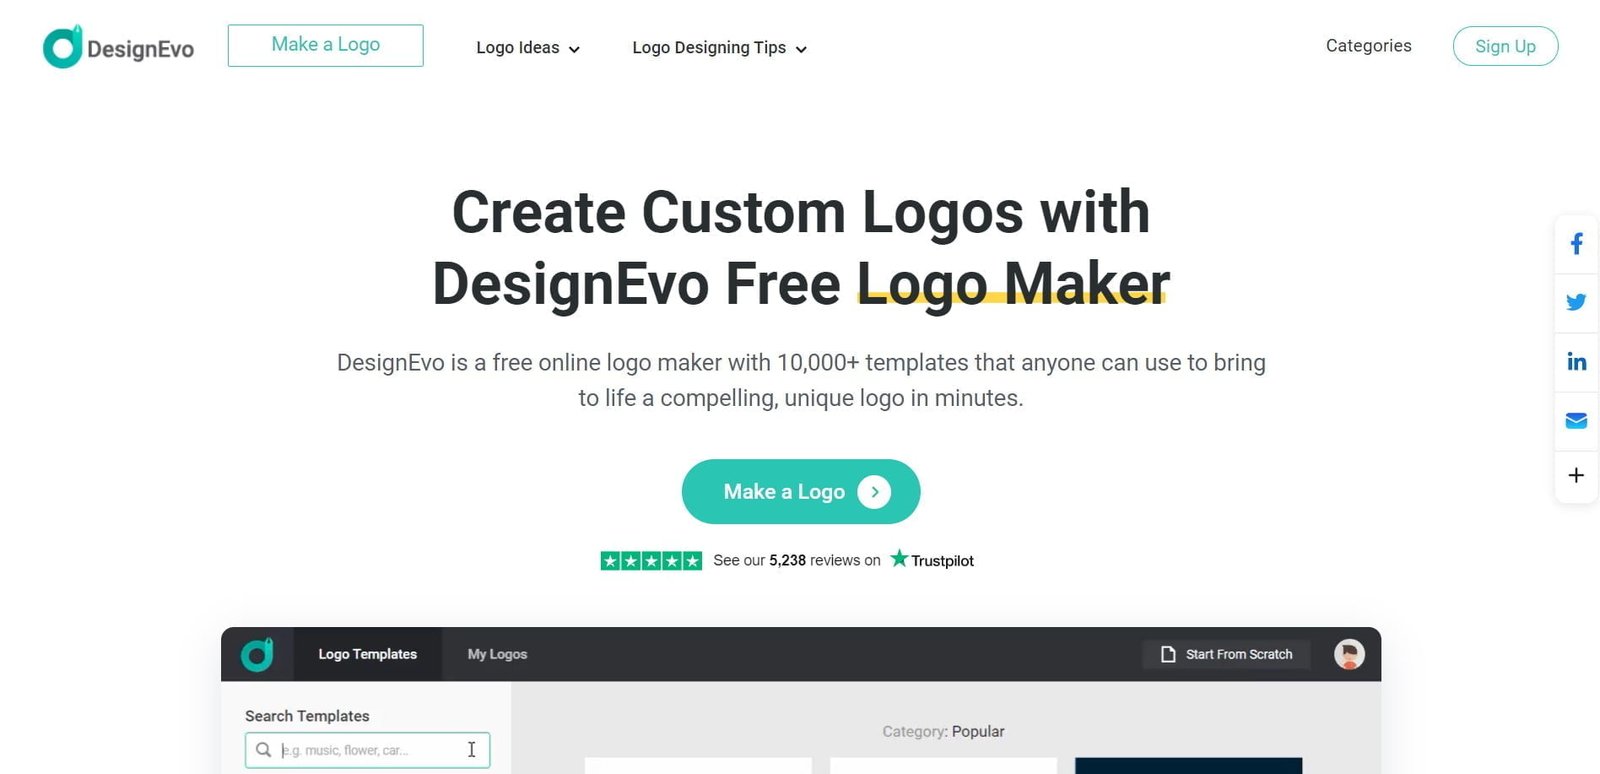 DesignEvo is an online logo maker that enables users to create unique